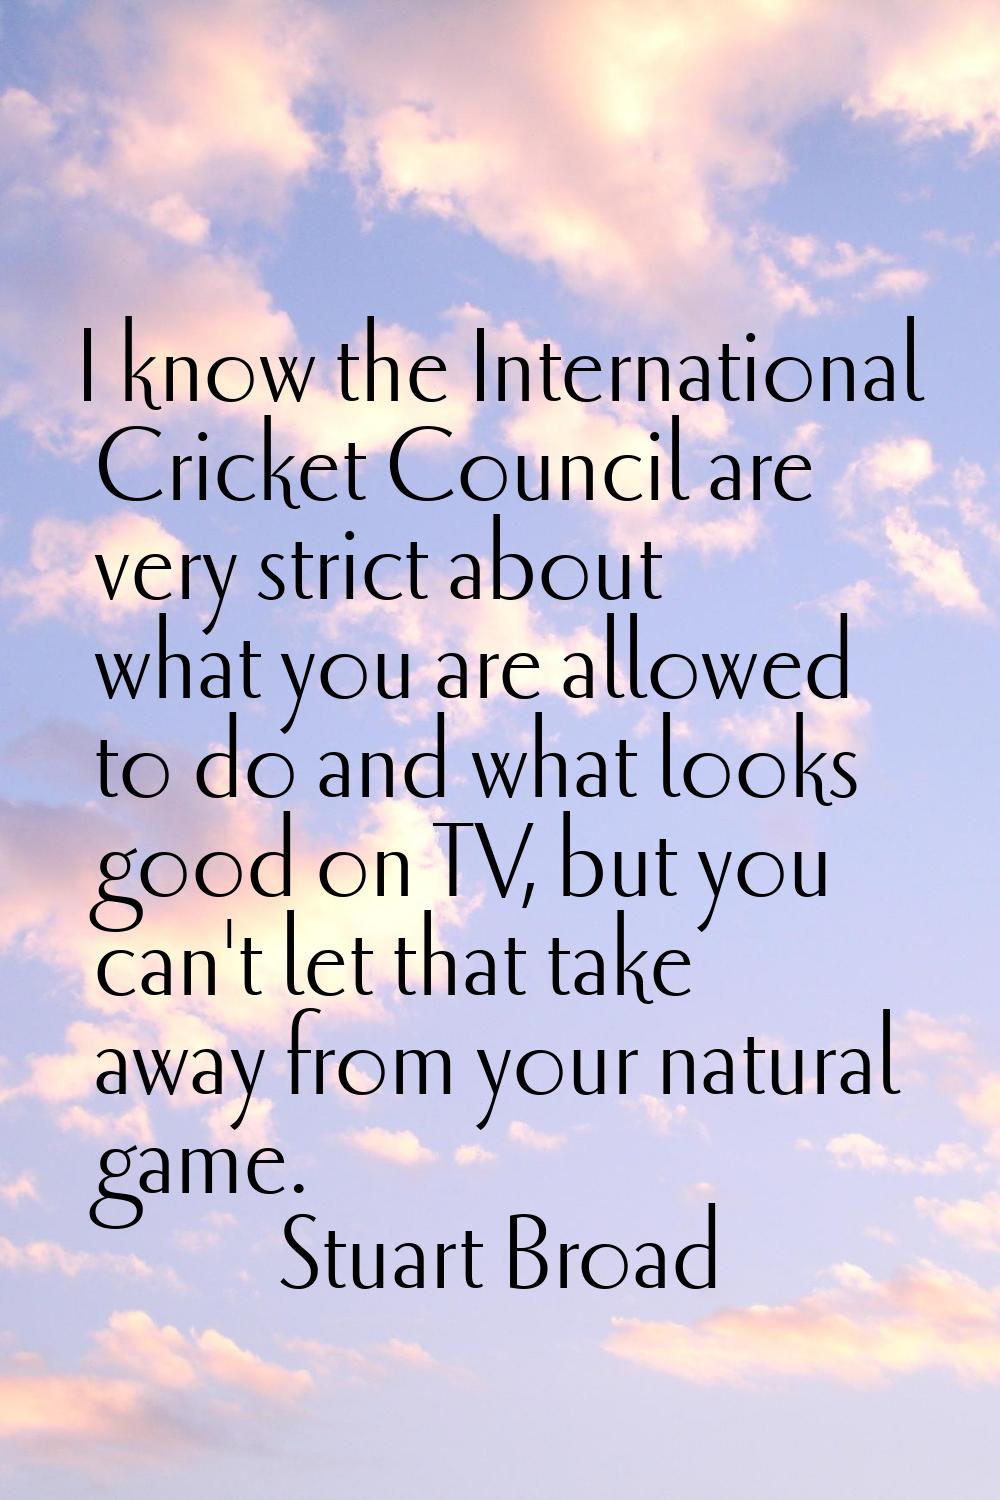 I know the International Cricket Council are very strict about what you are allowed to do and what 